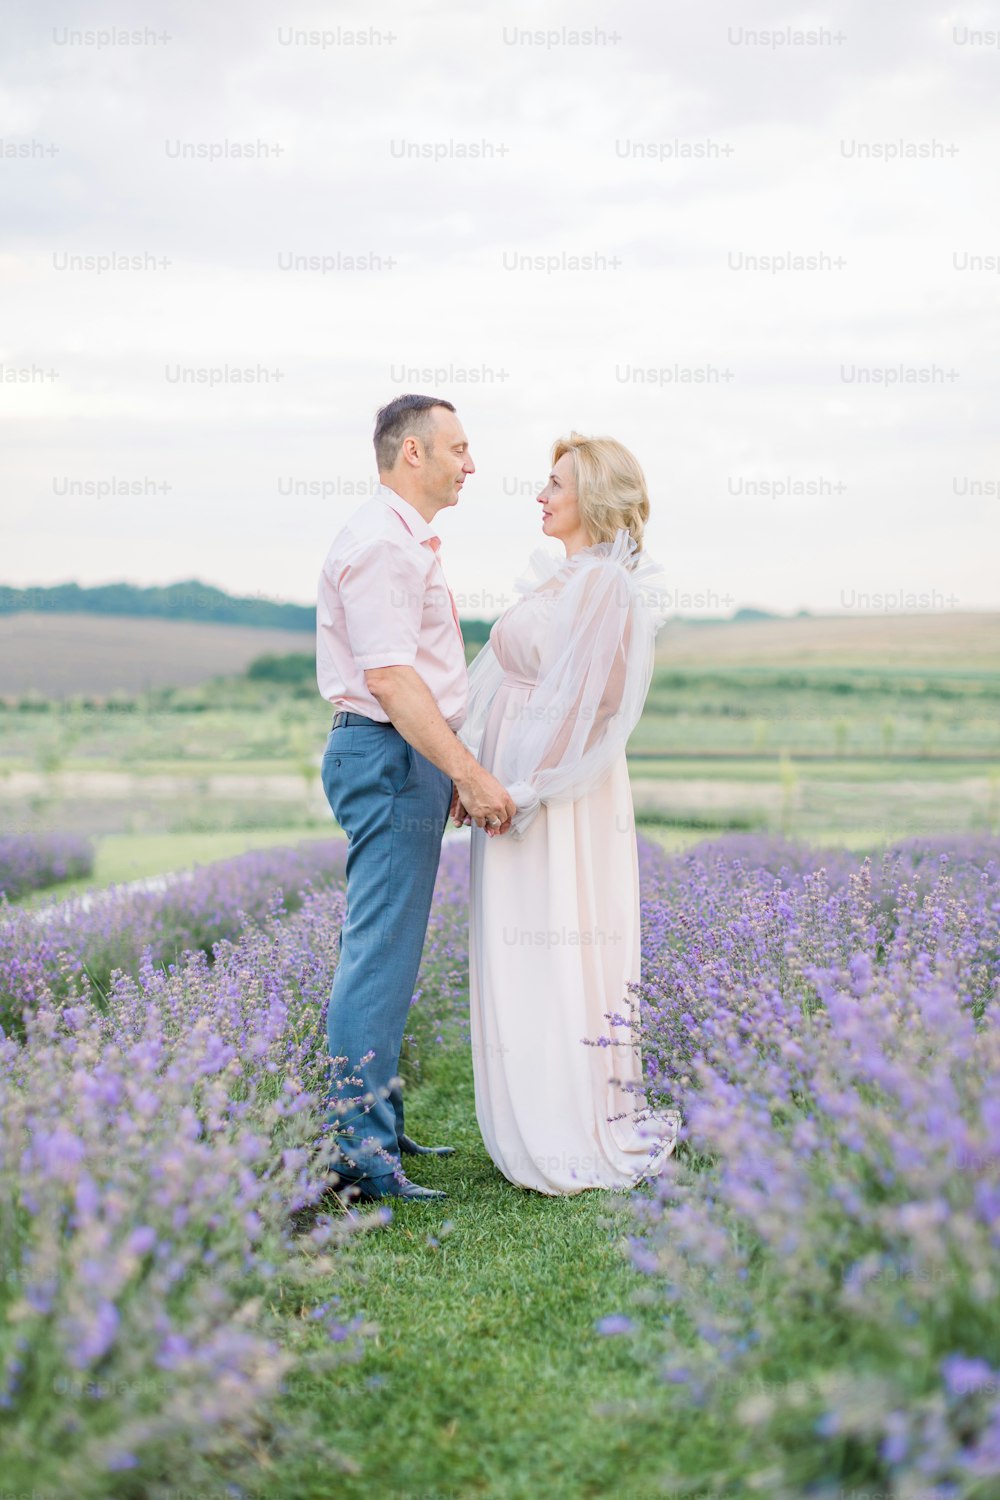 Family portrait of middle aged handsome man and pretty woman, standing outdoors on lavender field, holding hands and looking each other. Wedding anniversary concept. Love through the years